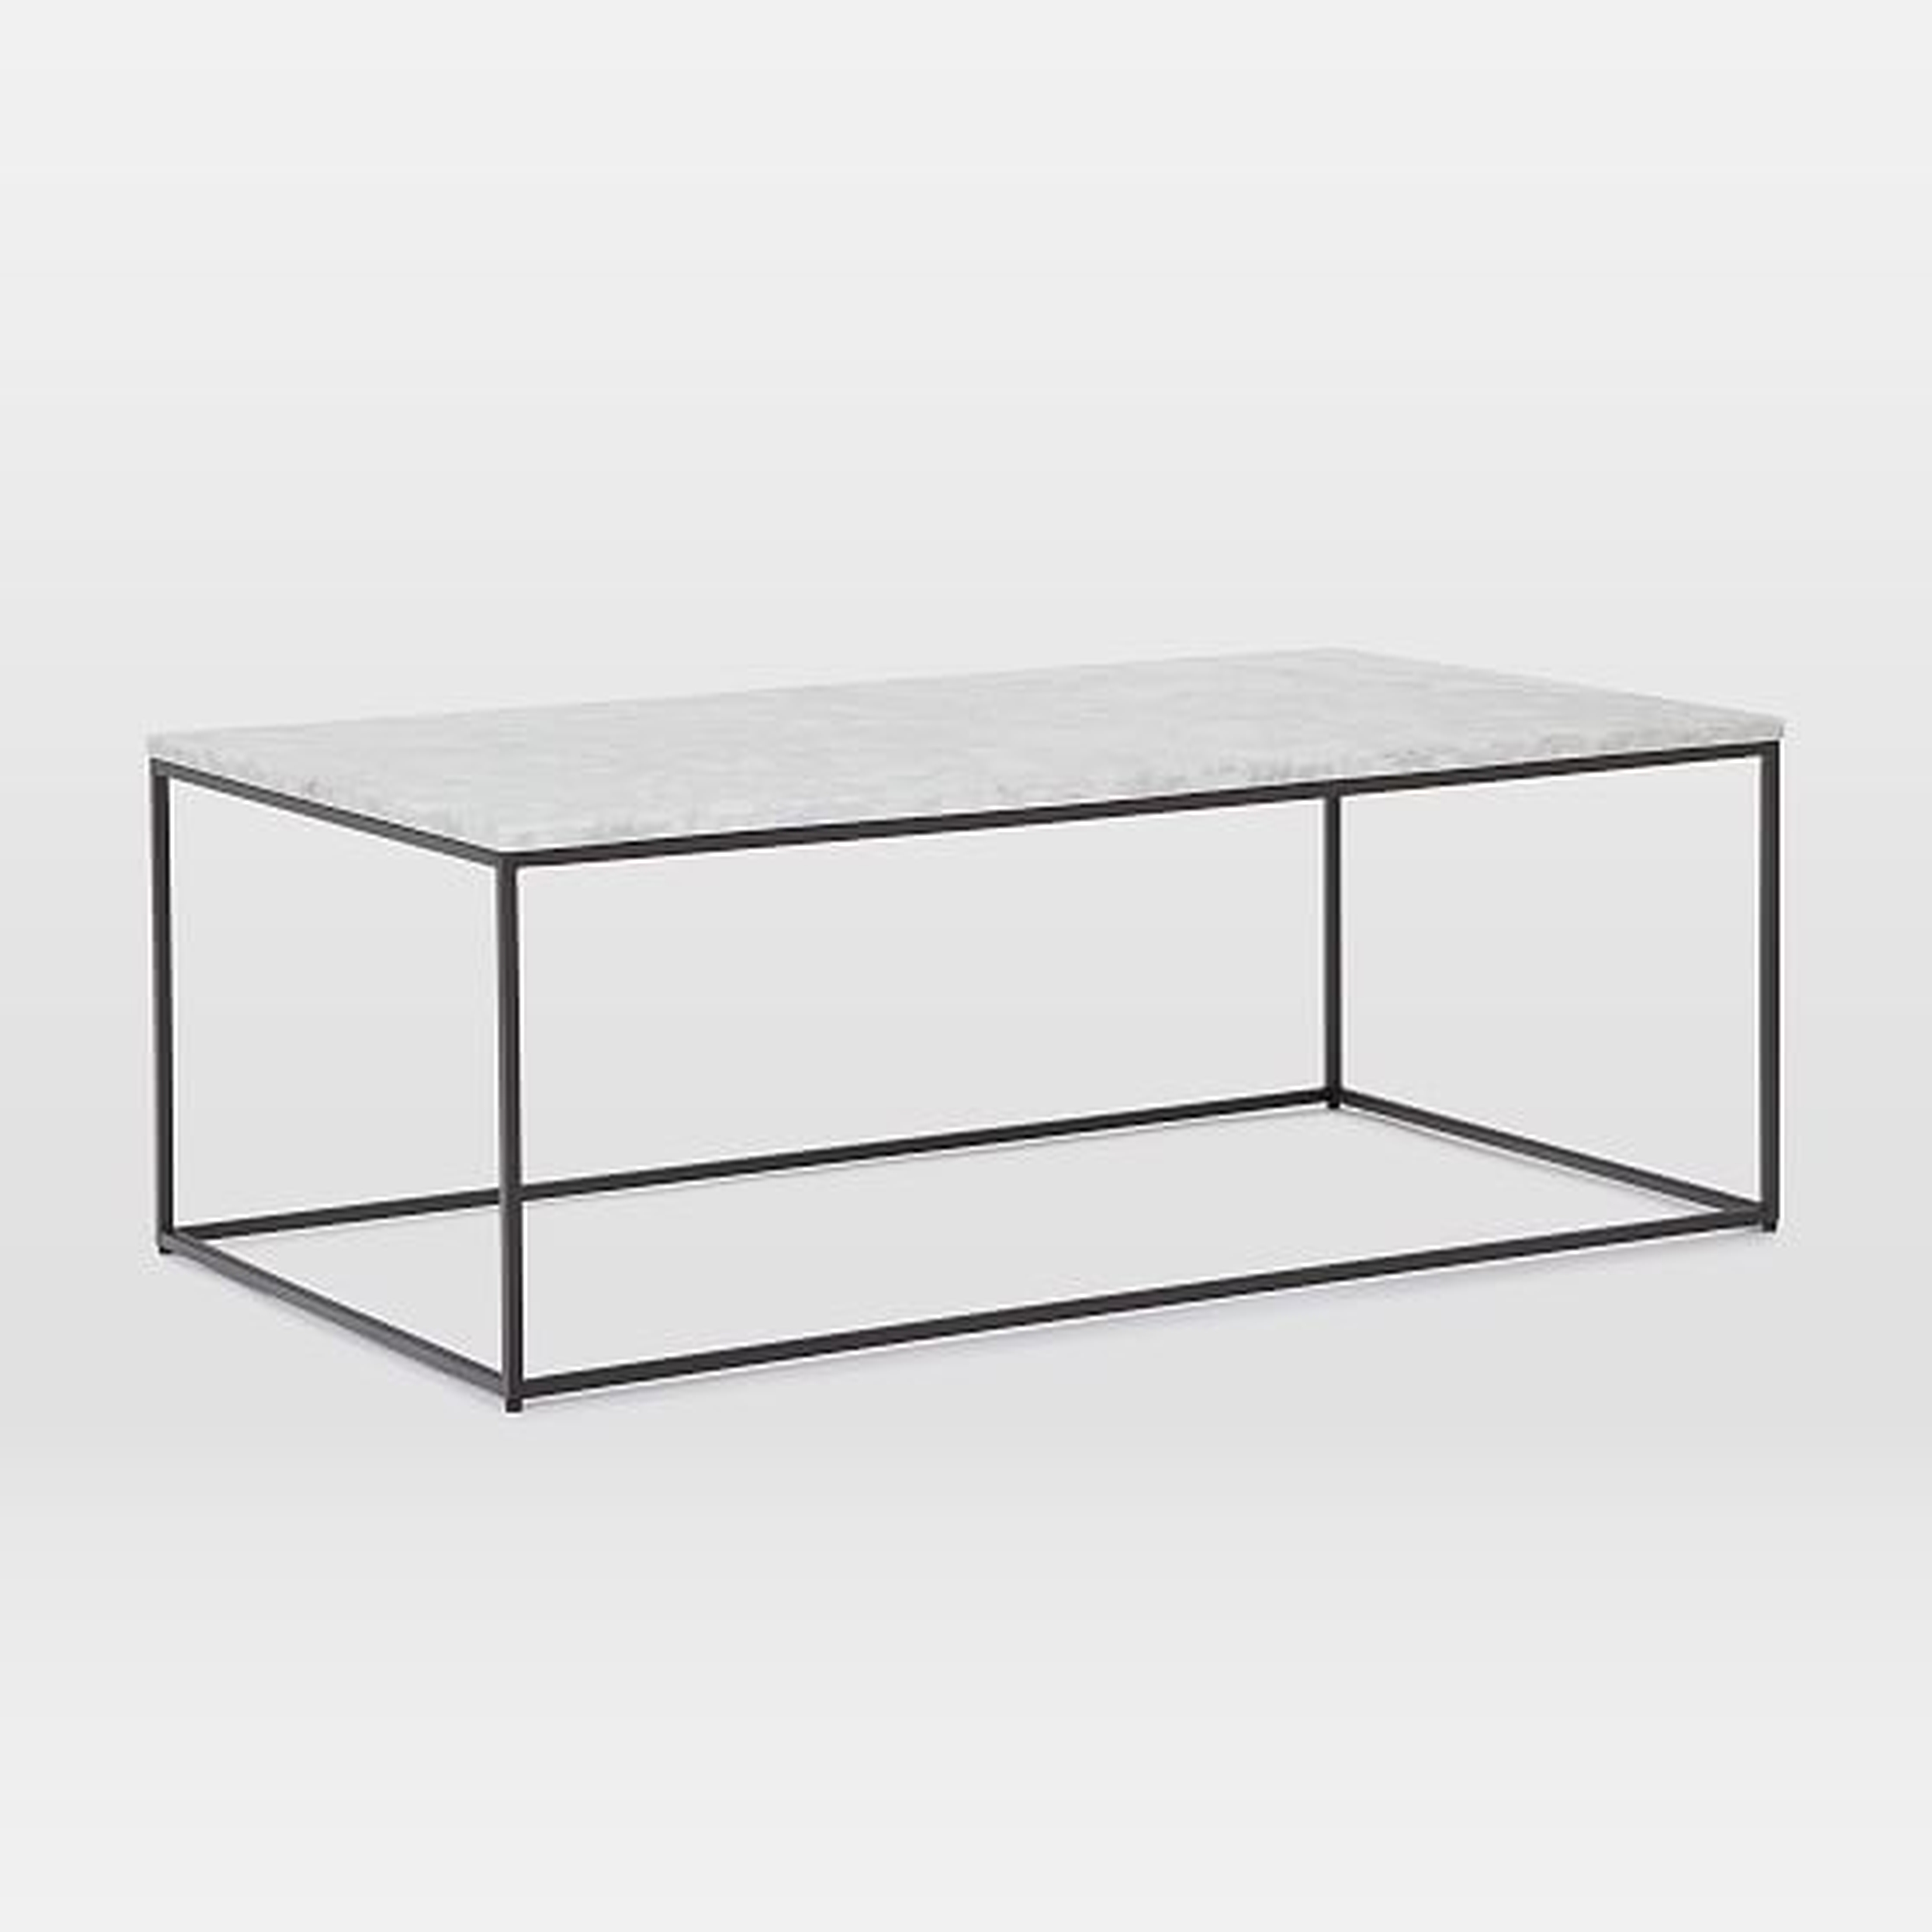 Streamline XL Rectangle Coffee Table, 52"x30", Marble and Antique Bronze - West Elm